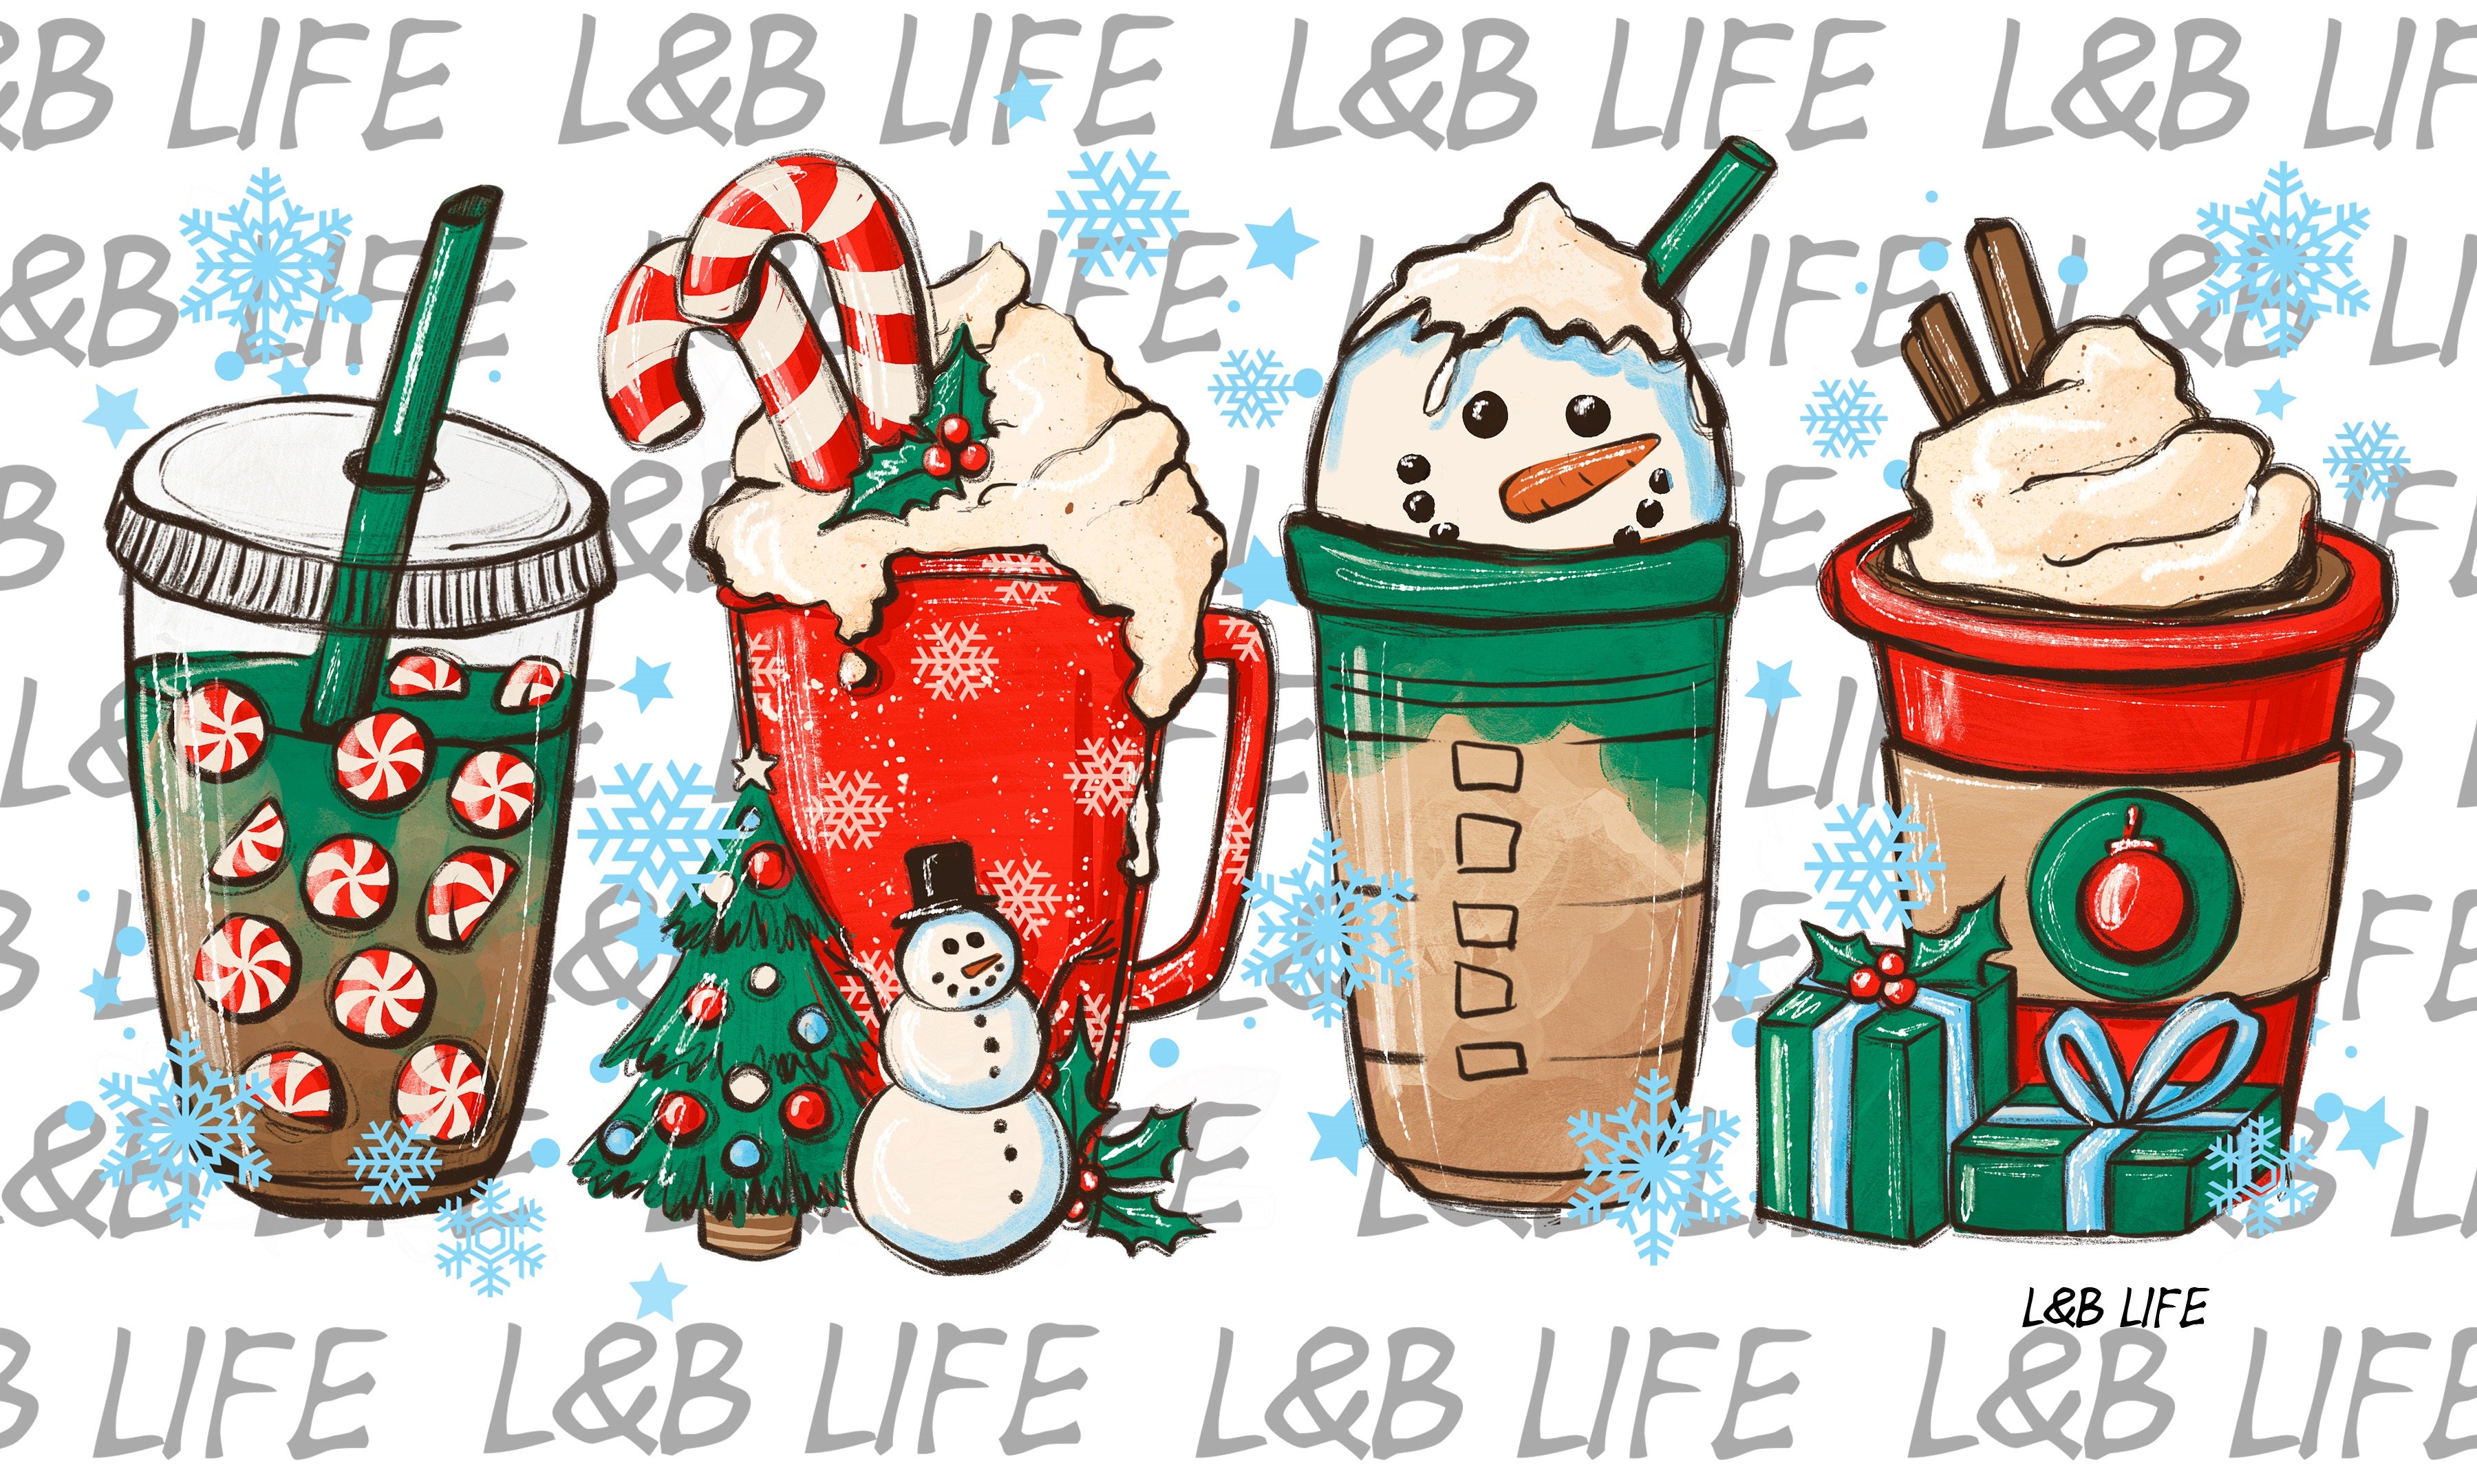 VALENTINES DAY CUPS - Lucky and Blessed Life LLC / L&B Life